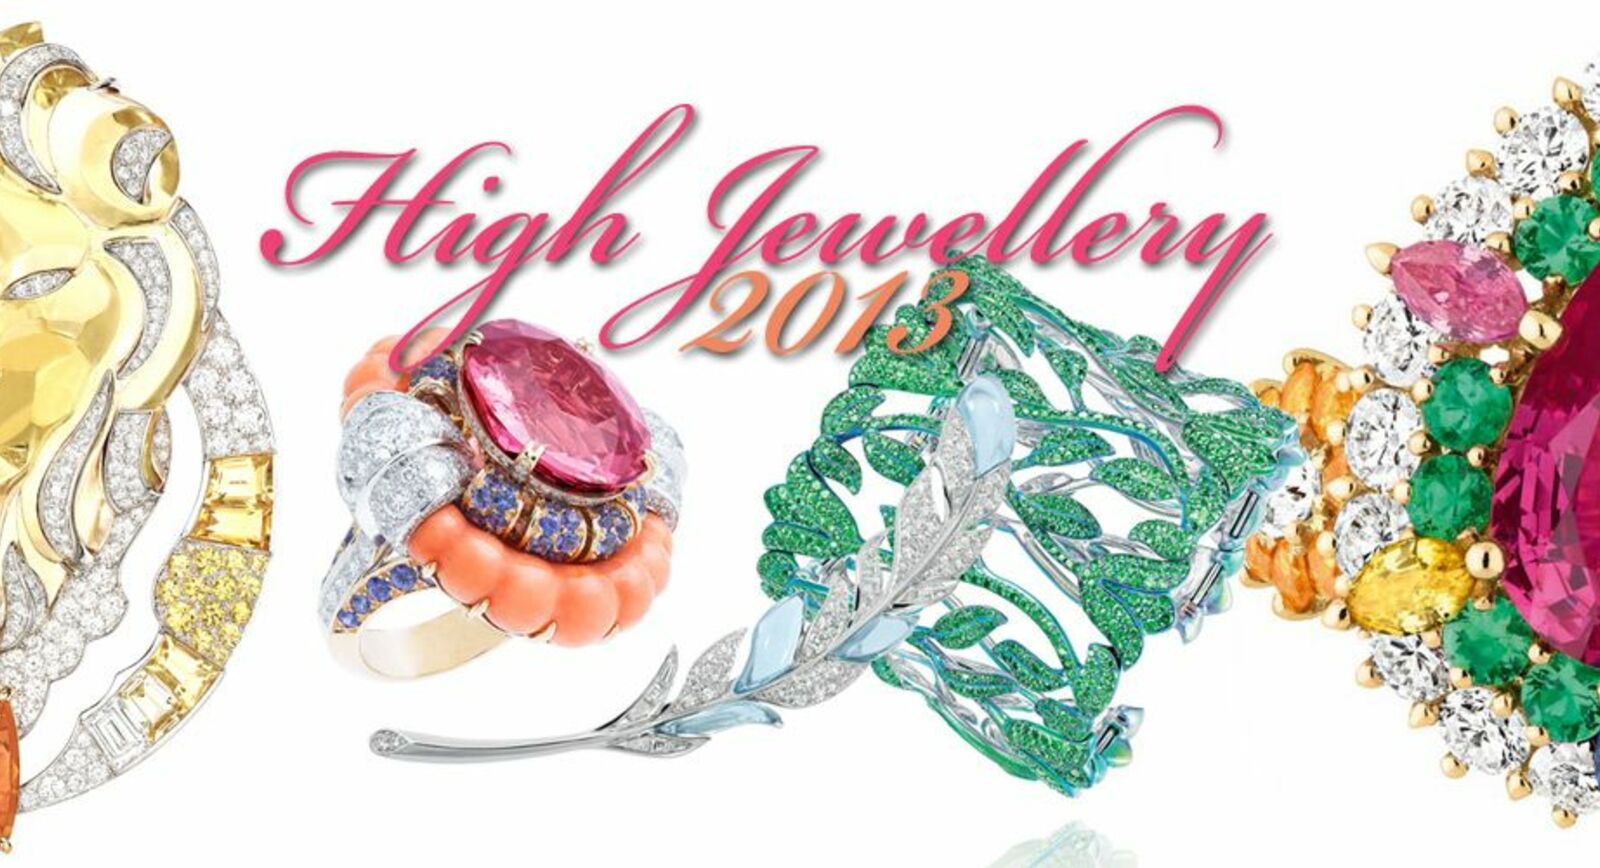 The Premier League: High Jewellery in 2013, part 1Chopard